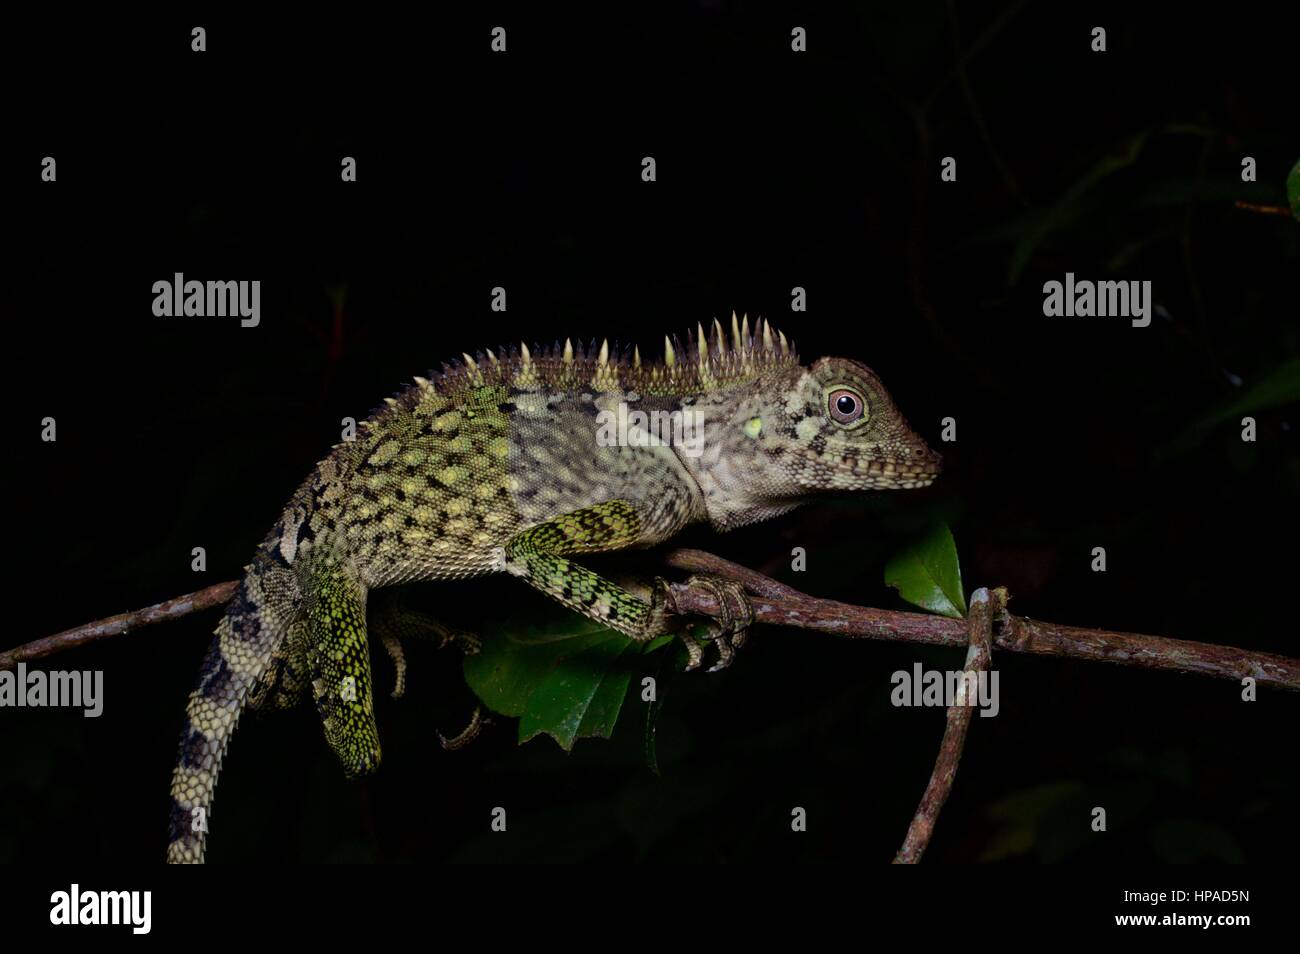 A Bell's Angle-headed Lizard resting at night in Fraser's Hill, Pahang, Malaysia Stock Photo